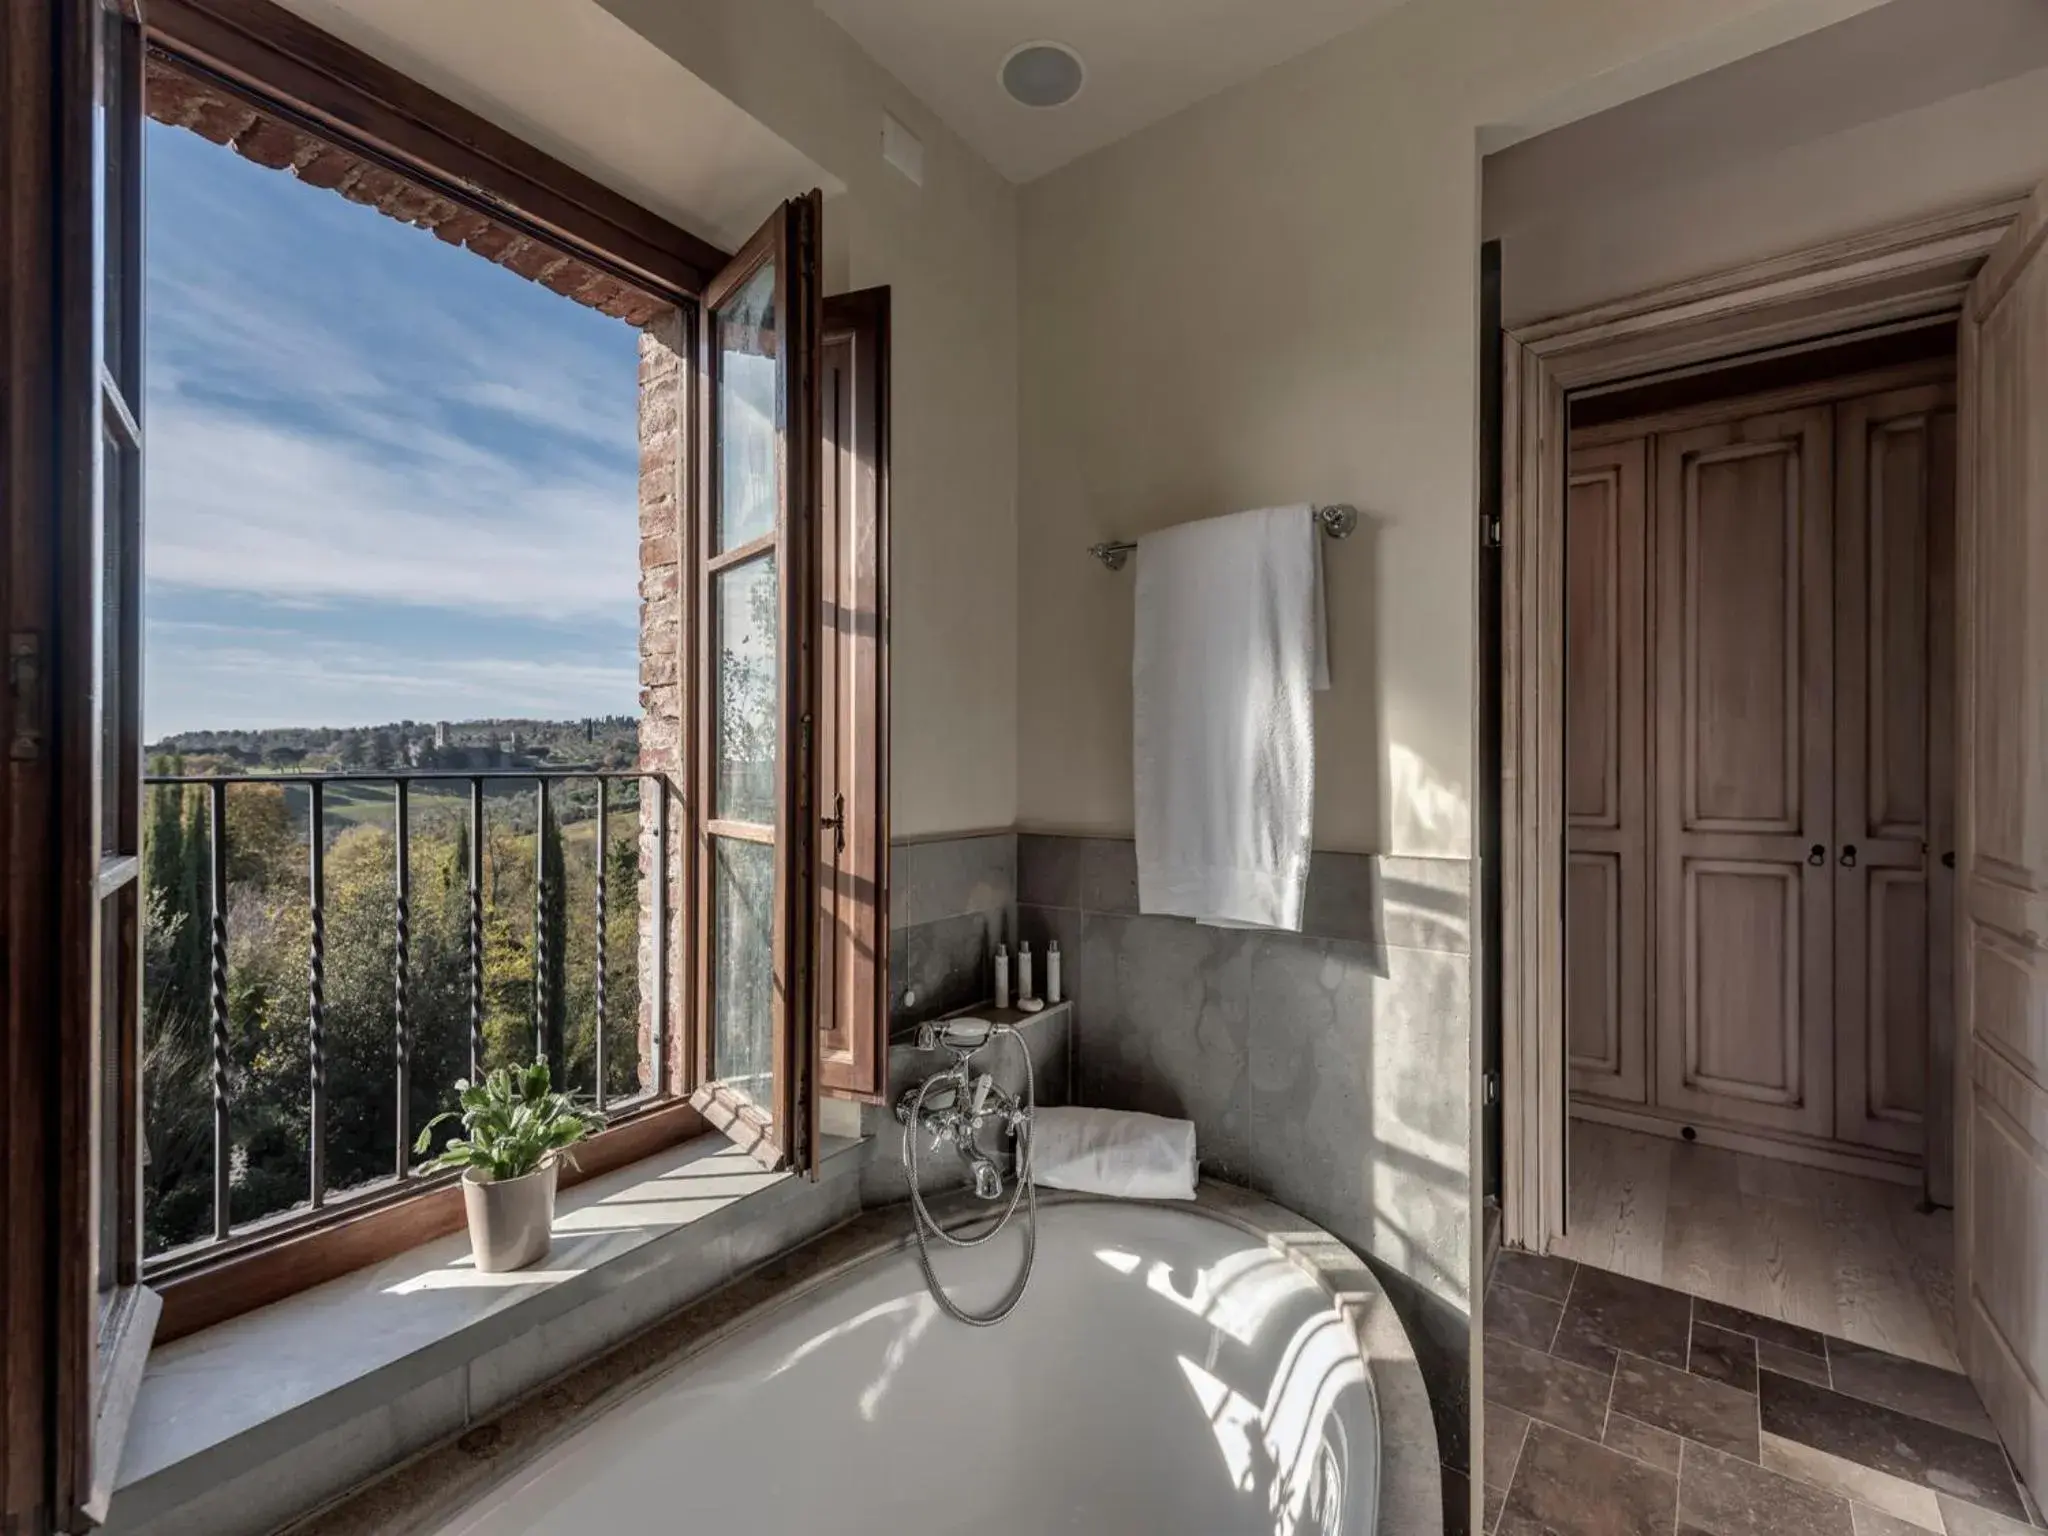 Bathroom in Castel Monastero - The Leading Hotels of the World